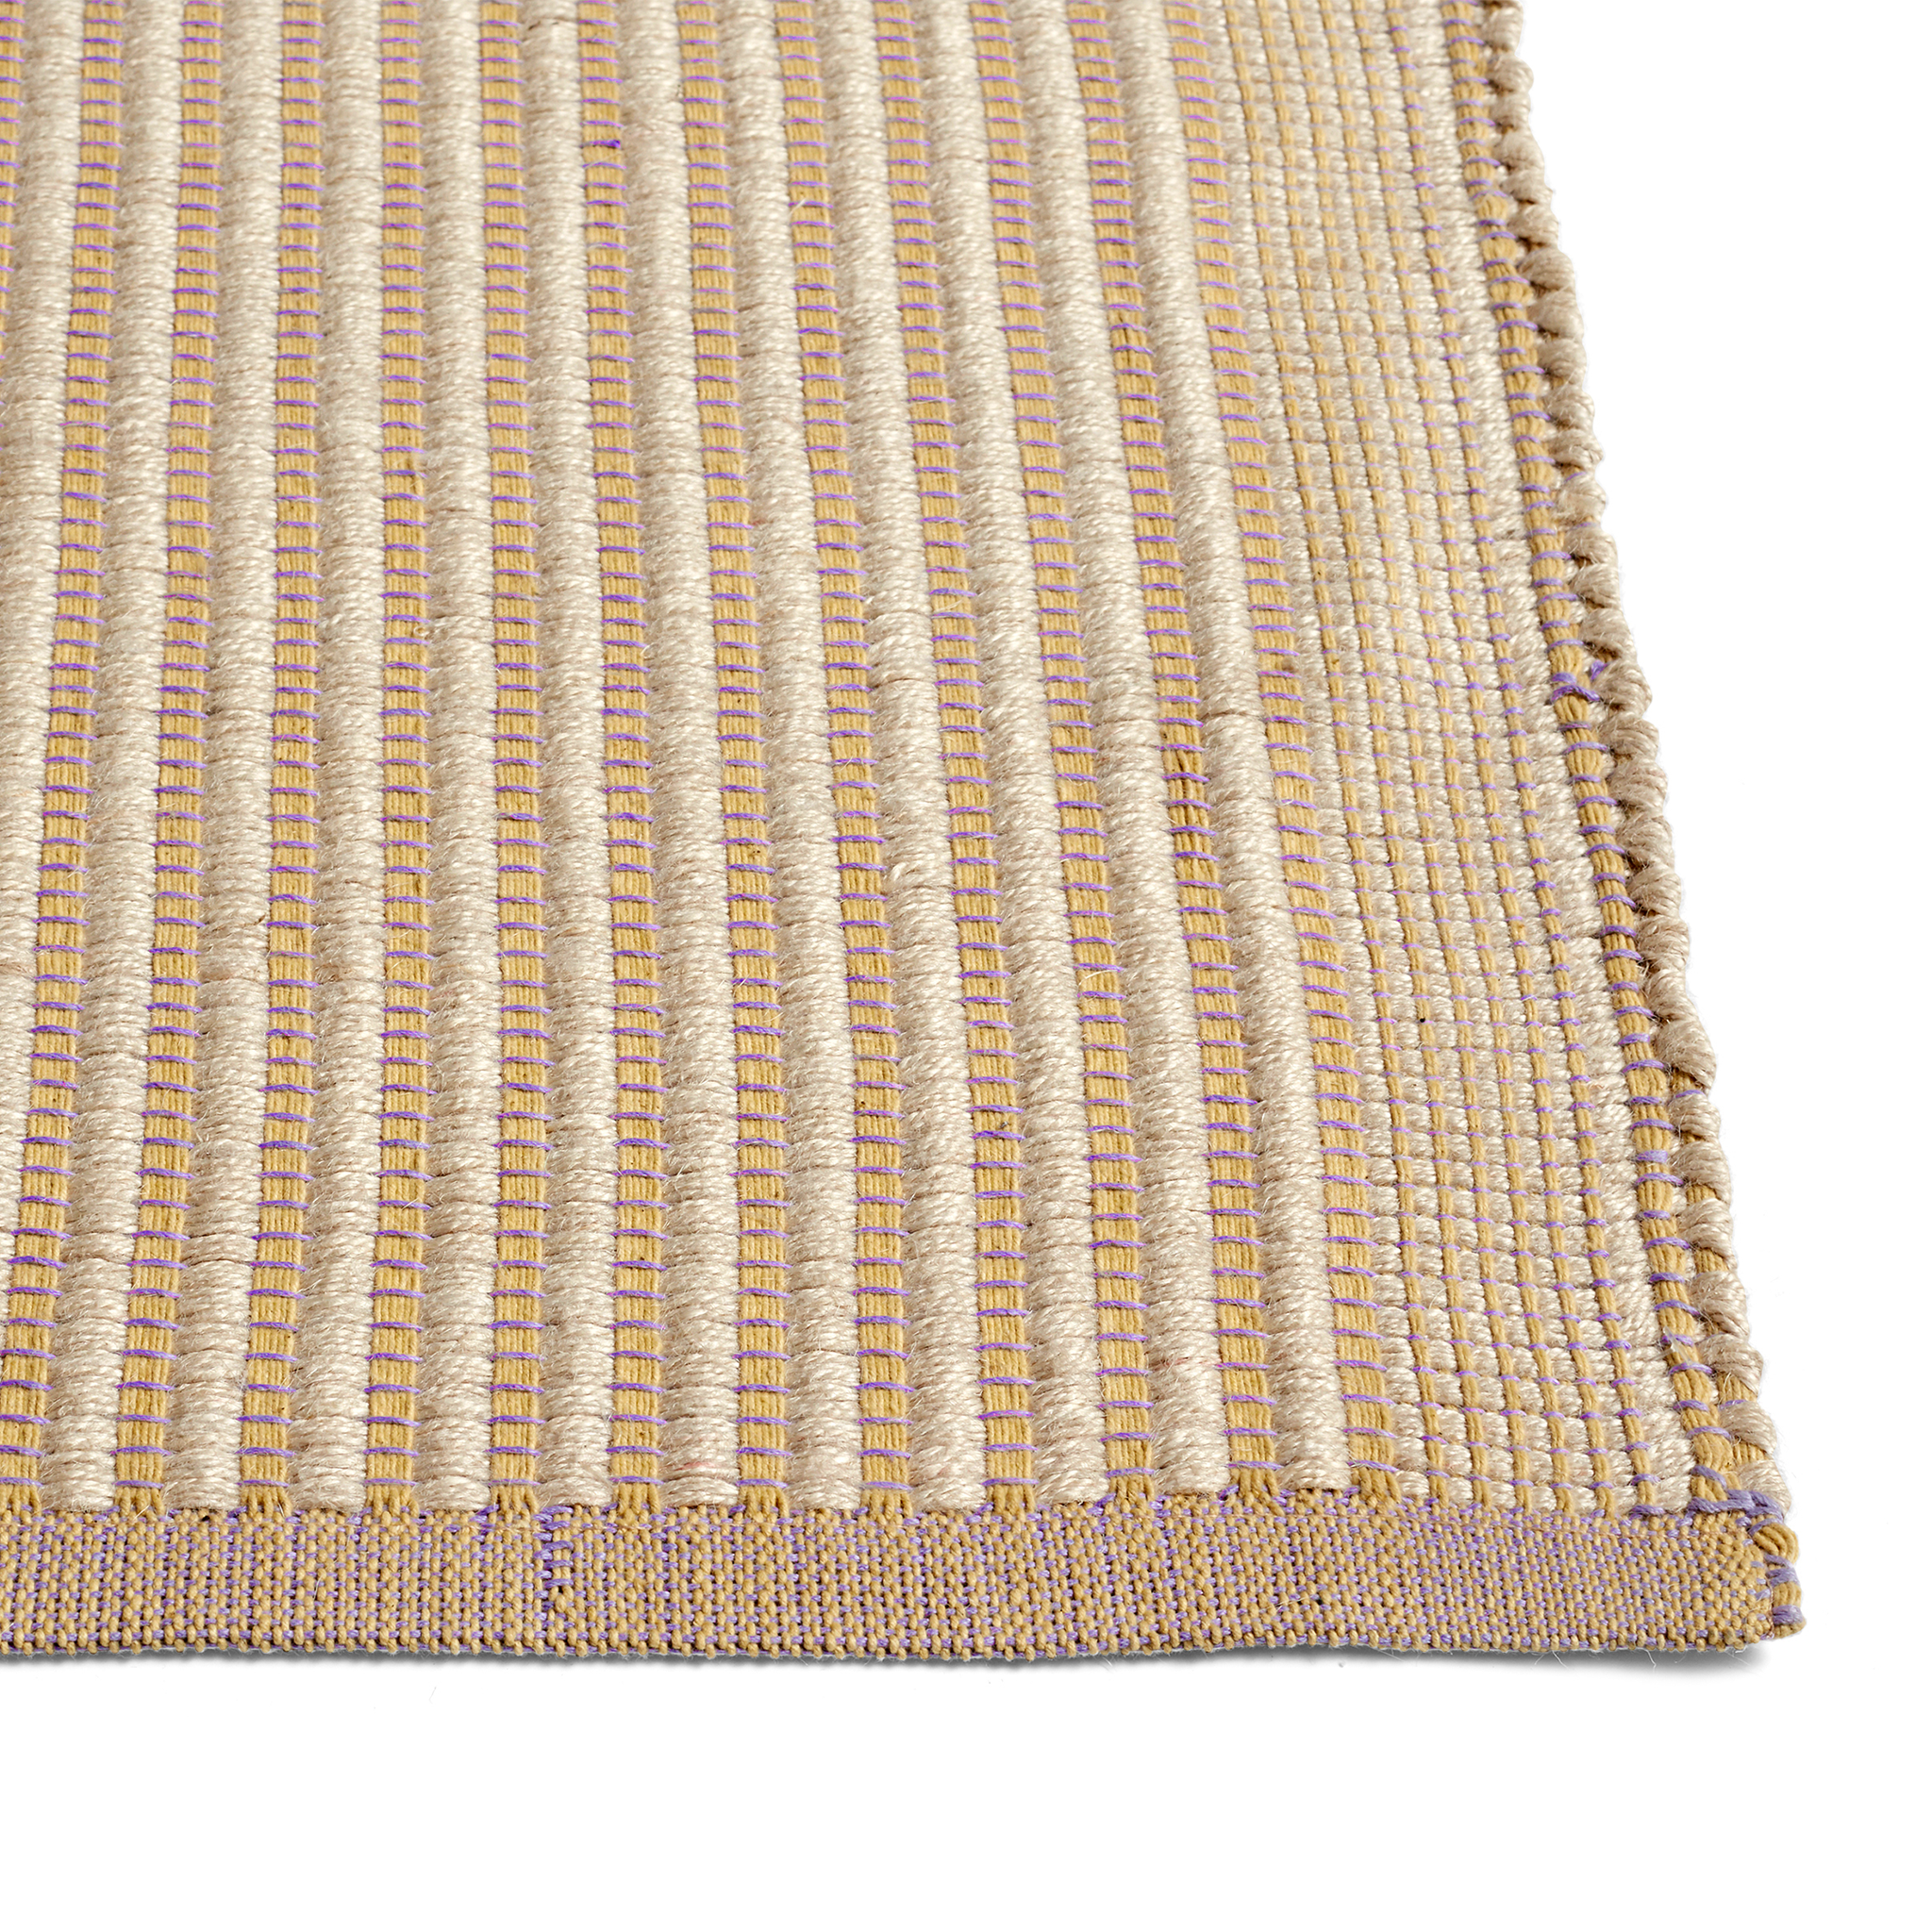 Clearance Tapis Rug L200 x W80cm / Off White & Lavender by Julie Richoz for Hay